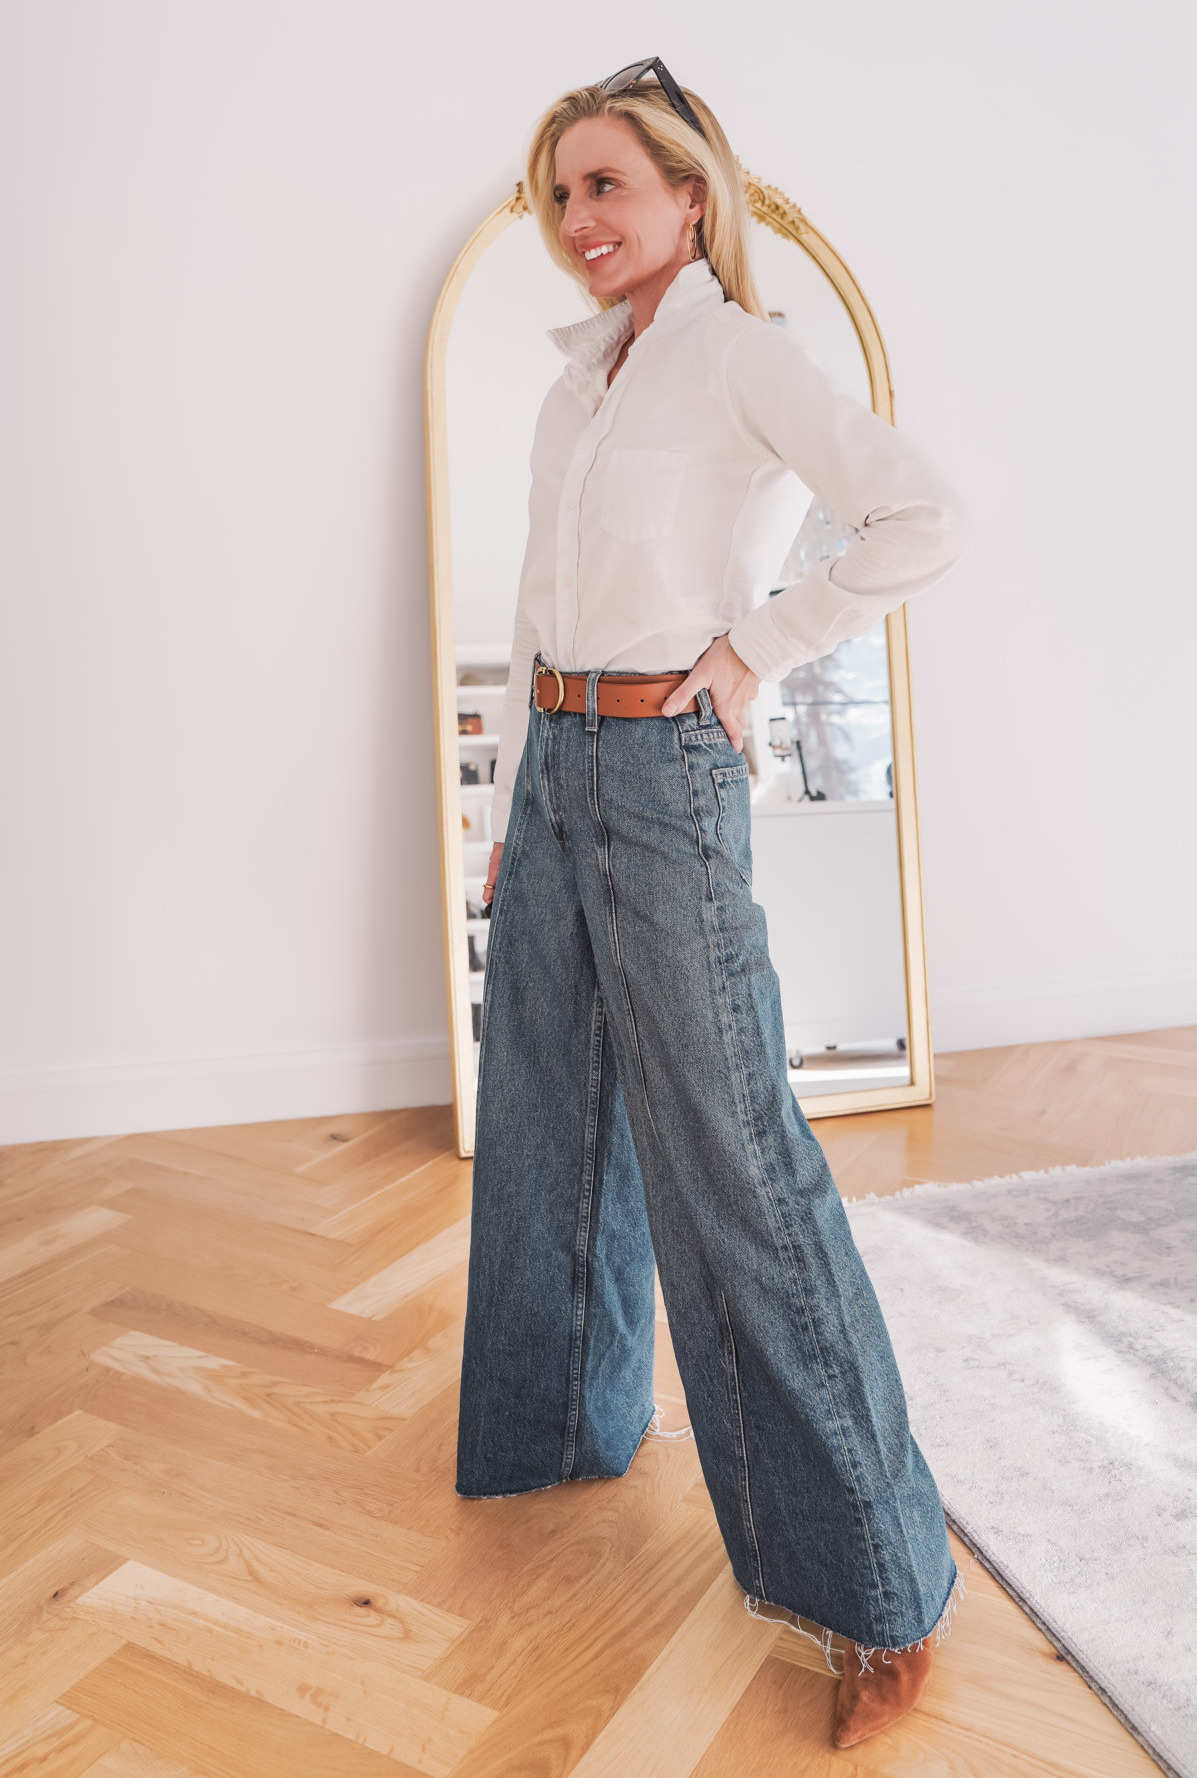 What to wear with bell-bottom pants? [Fashion Guide]